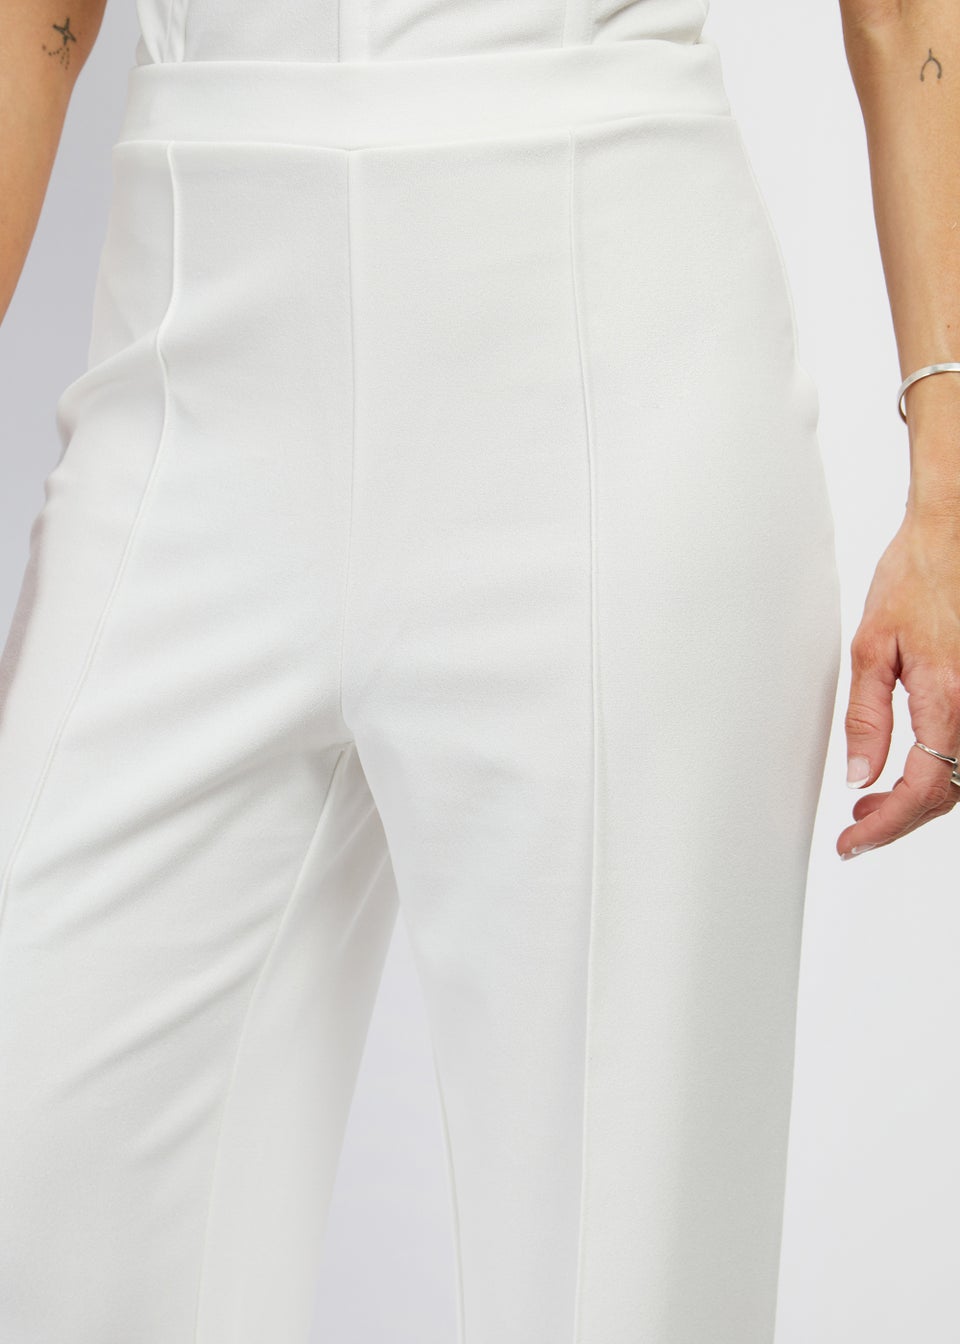 Girls on Film by Dani Dyer Ivory Wide Leg Co-Ord Trousers